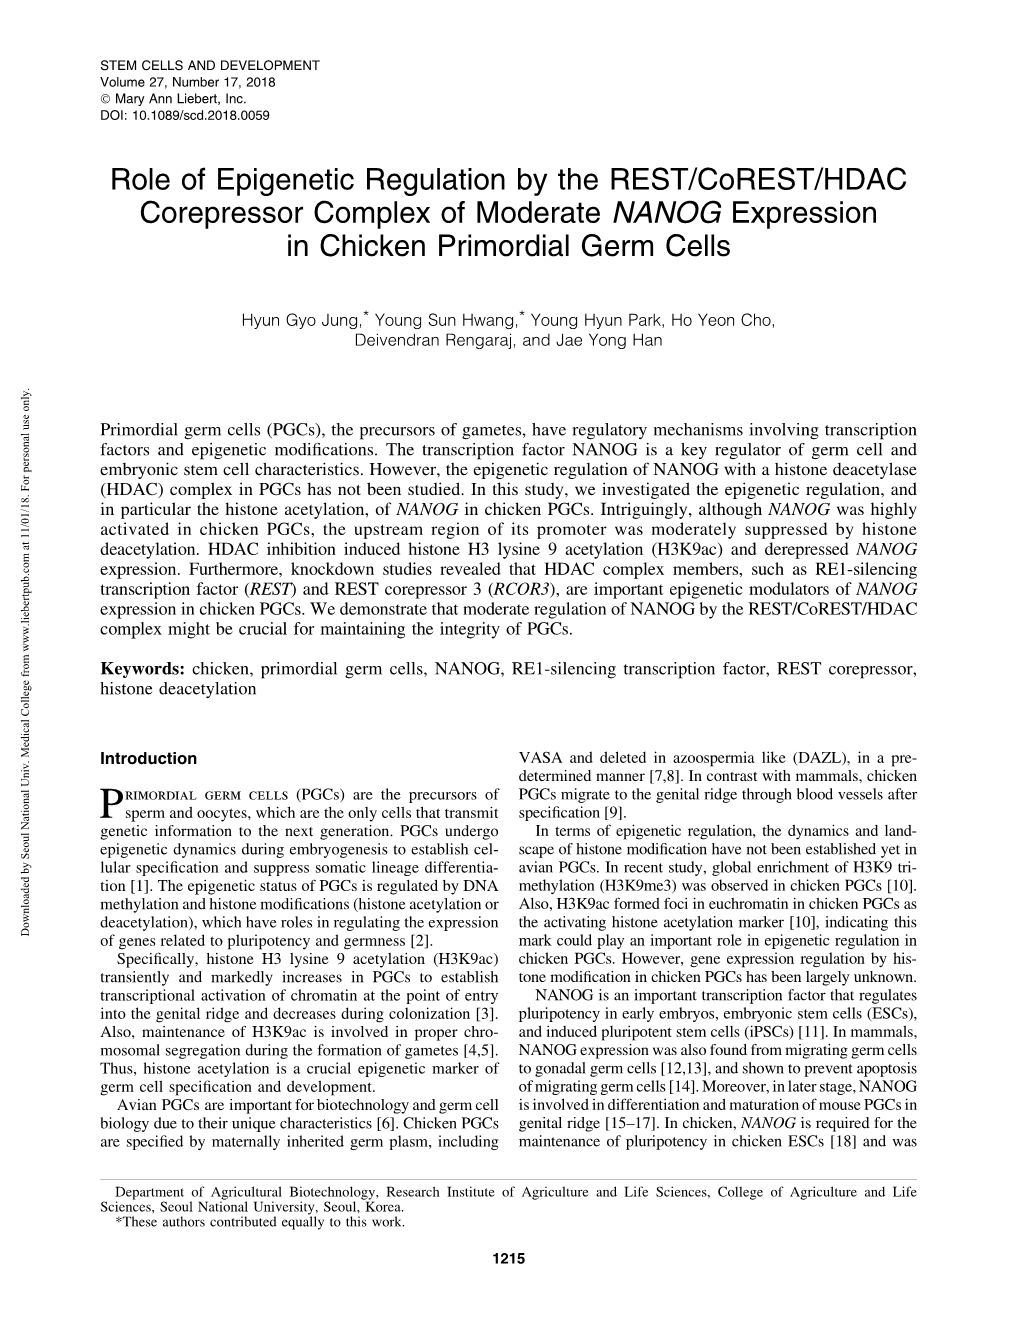 Role of Epigenetic Regulation by the REST/Corest/HDAC Corepressor Complex of Moderate NANOG Expression in Chicken Primordial Germ Cells